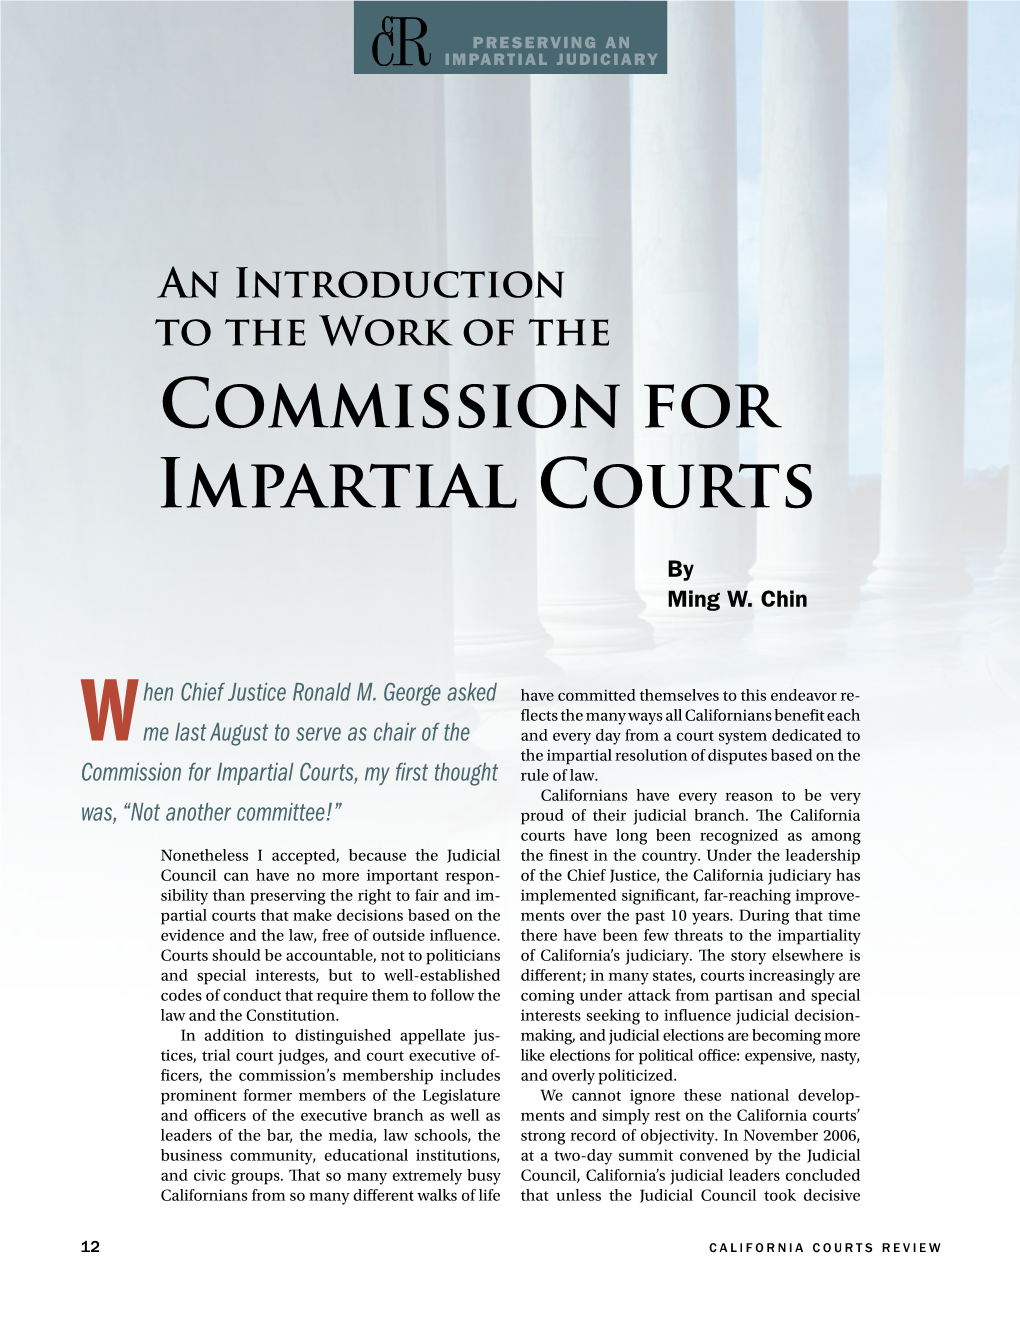 An Introduction to the Work of the Commission for Impartial Courts